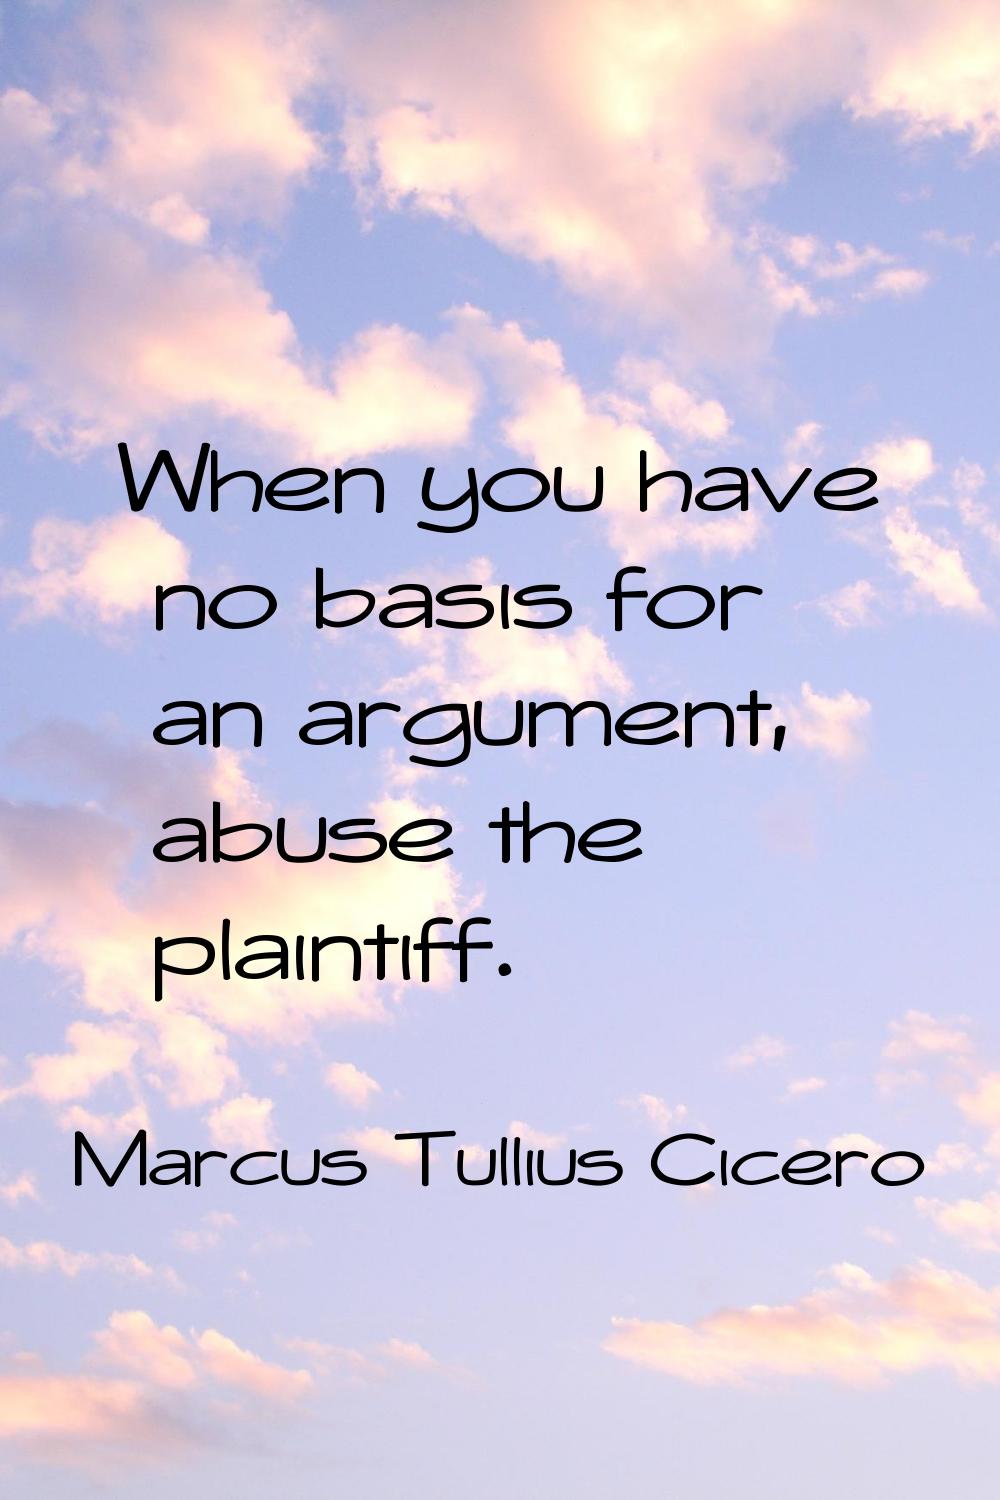 When you have no basis for an argument, abuse the plaintiff.